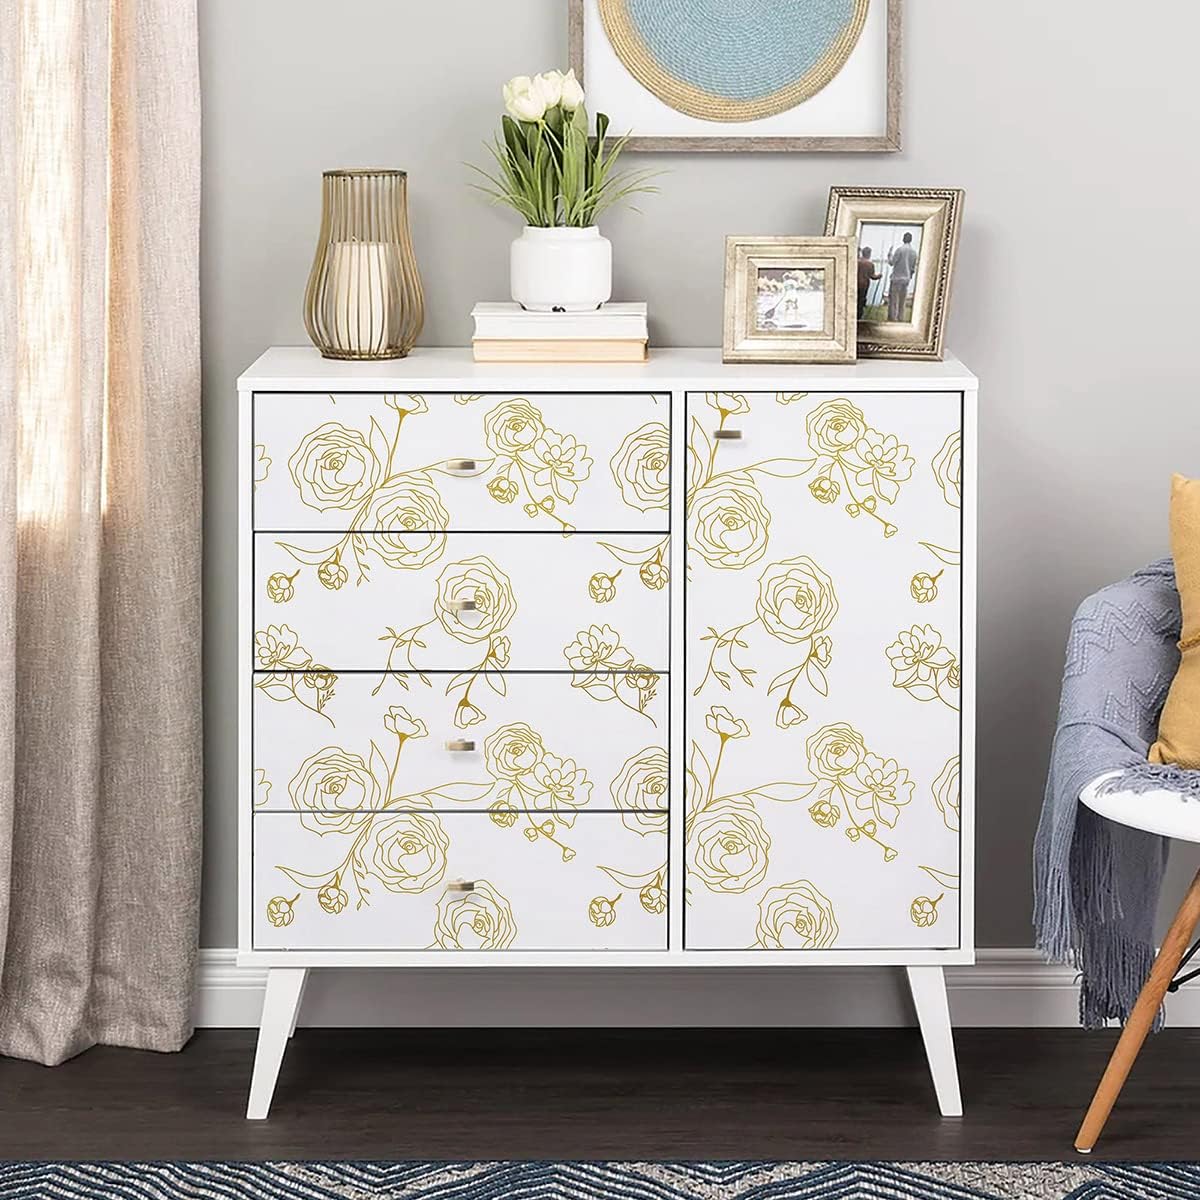 Safiyya Contact Paper Floral Wallpaper Gold and White Contact Paper Peel and Stick Wallpaper Boho Flower Contact Paper for Cabinets Covering Vinyl Rolls 78.7"x17.3"